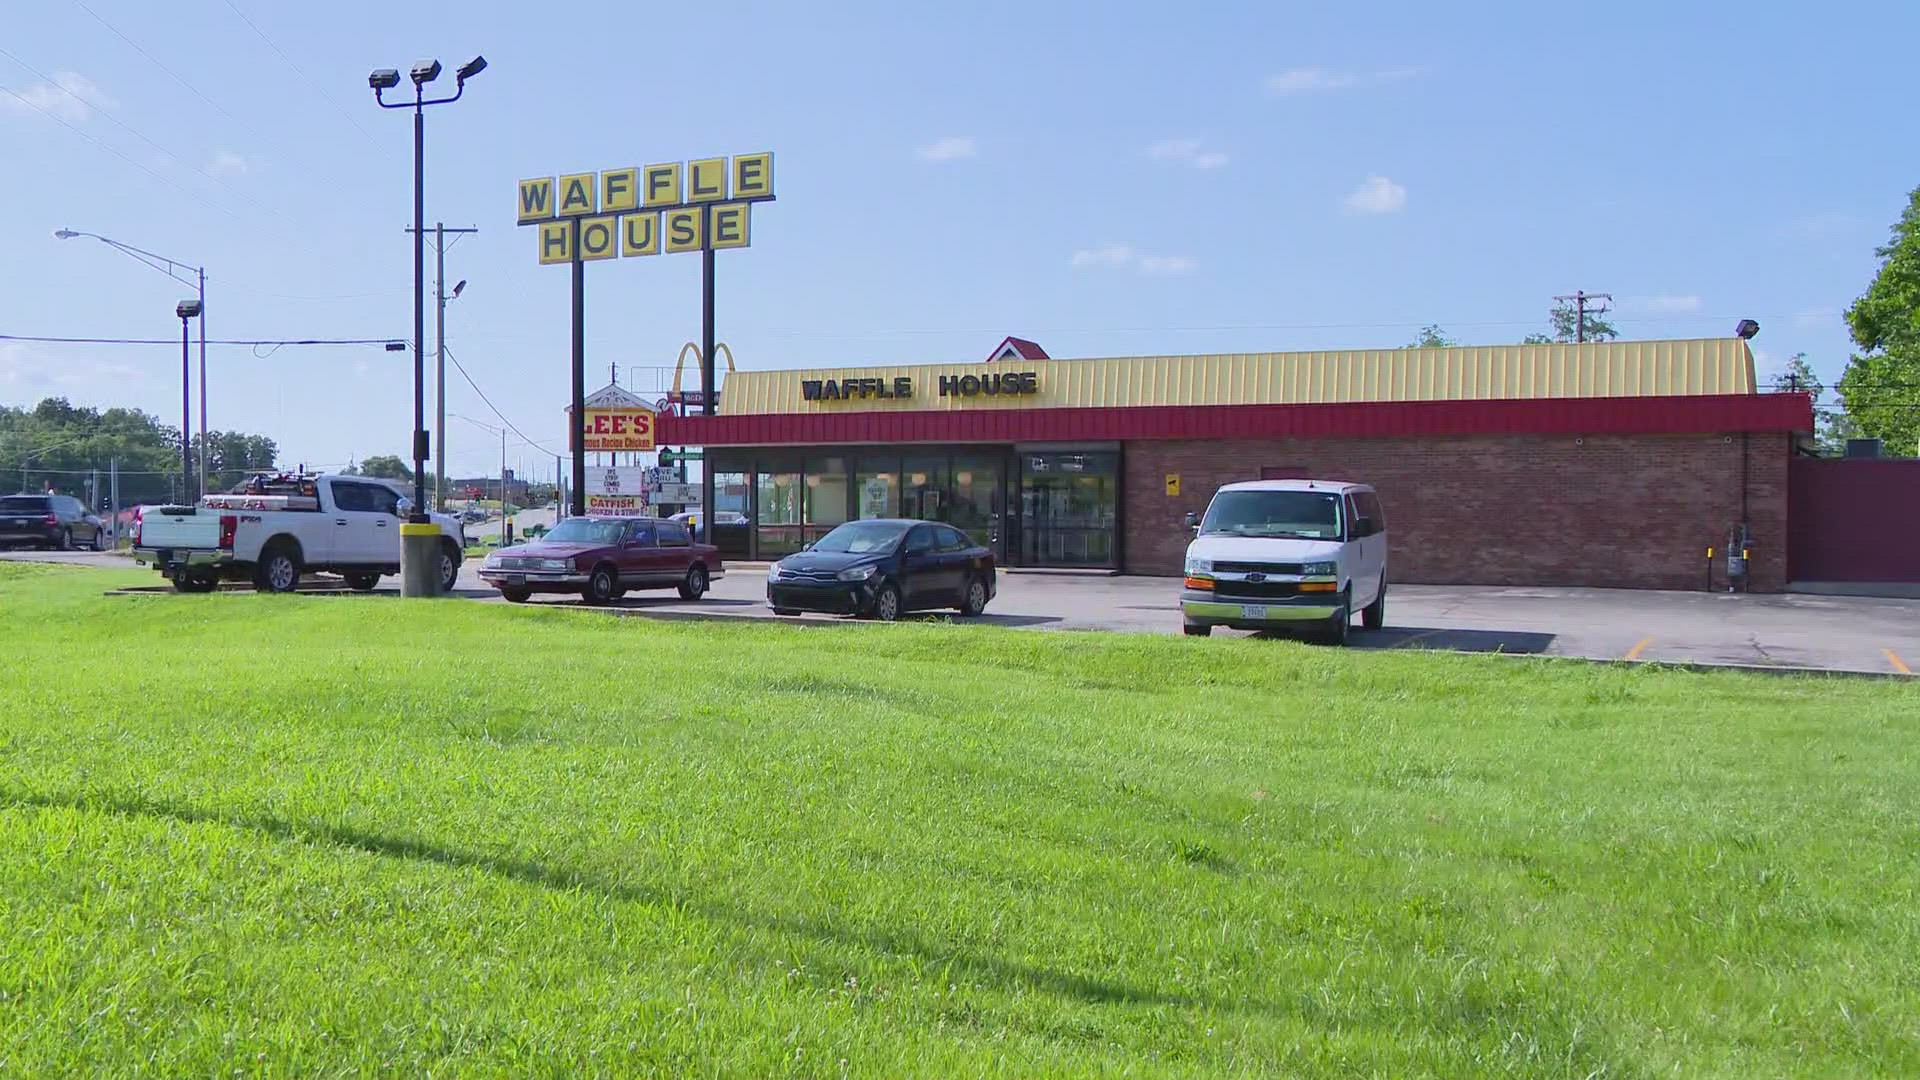 Two men were shot and killed at the Waffle House location on South Dixie Boulevard early Saturday.